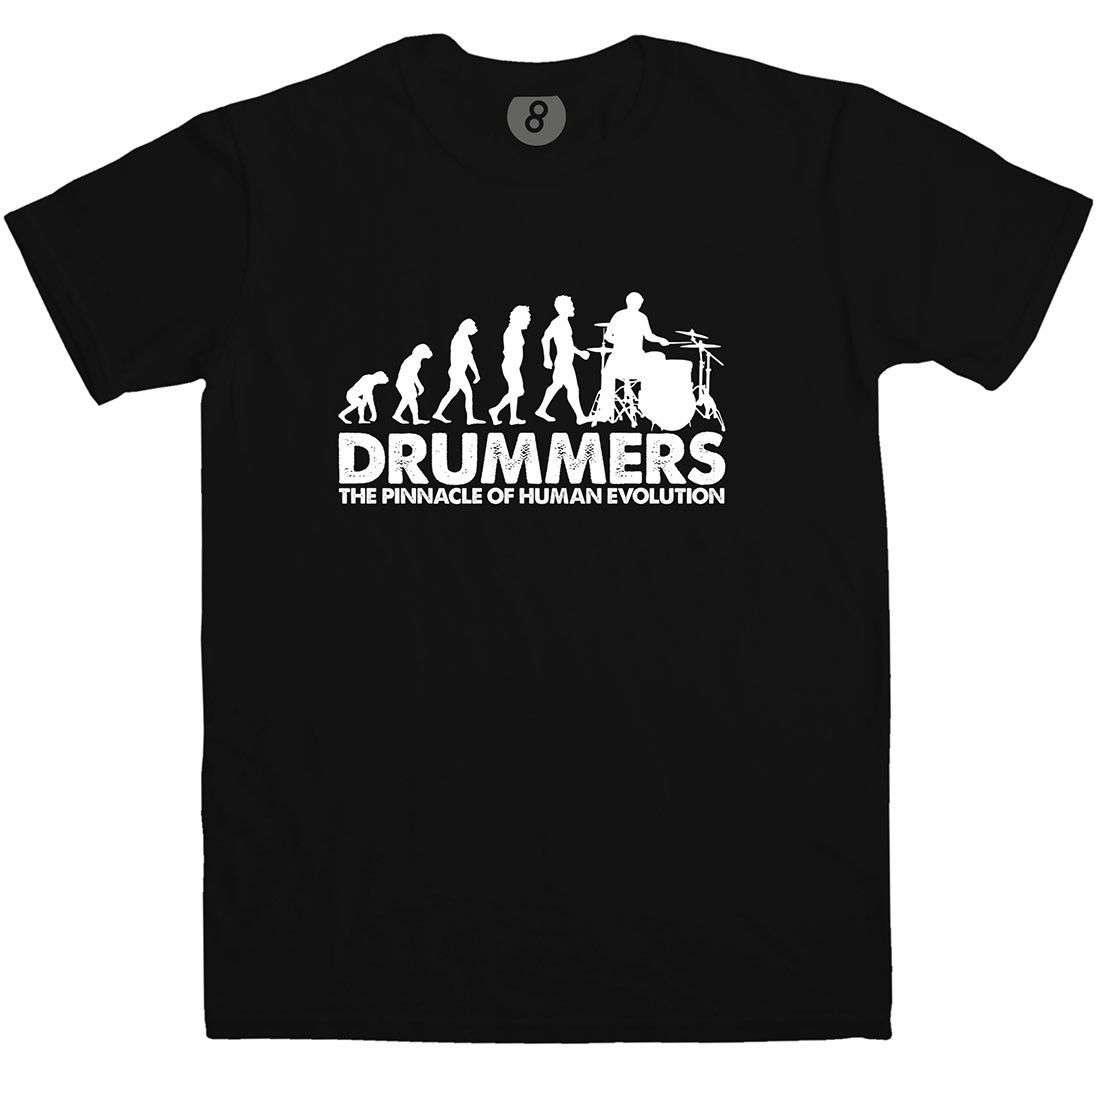 Drummers The Pinnacle of Evolution T-Shirt For Men 8Ball